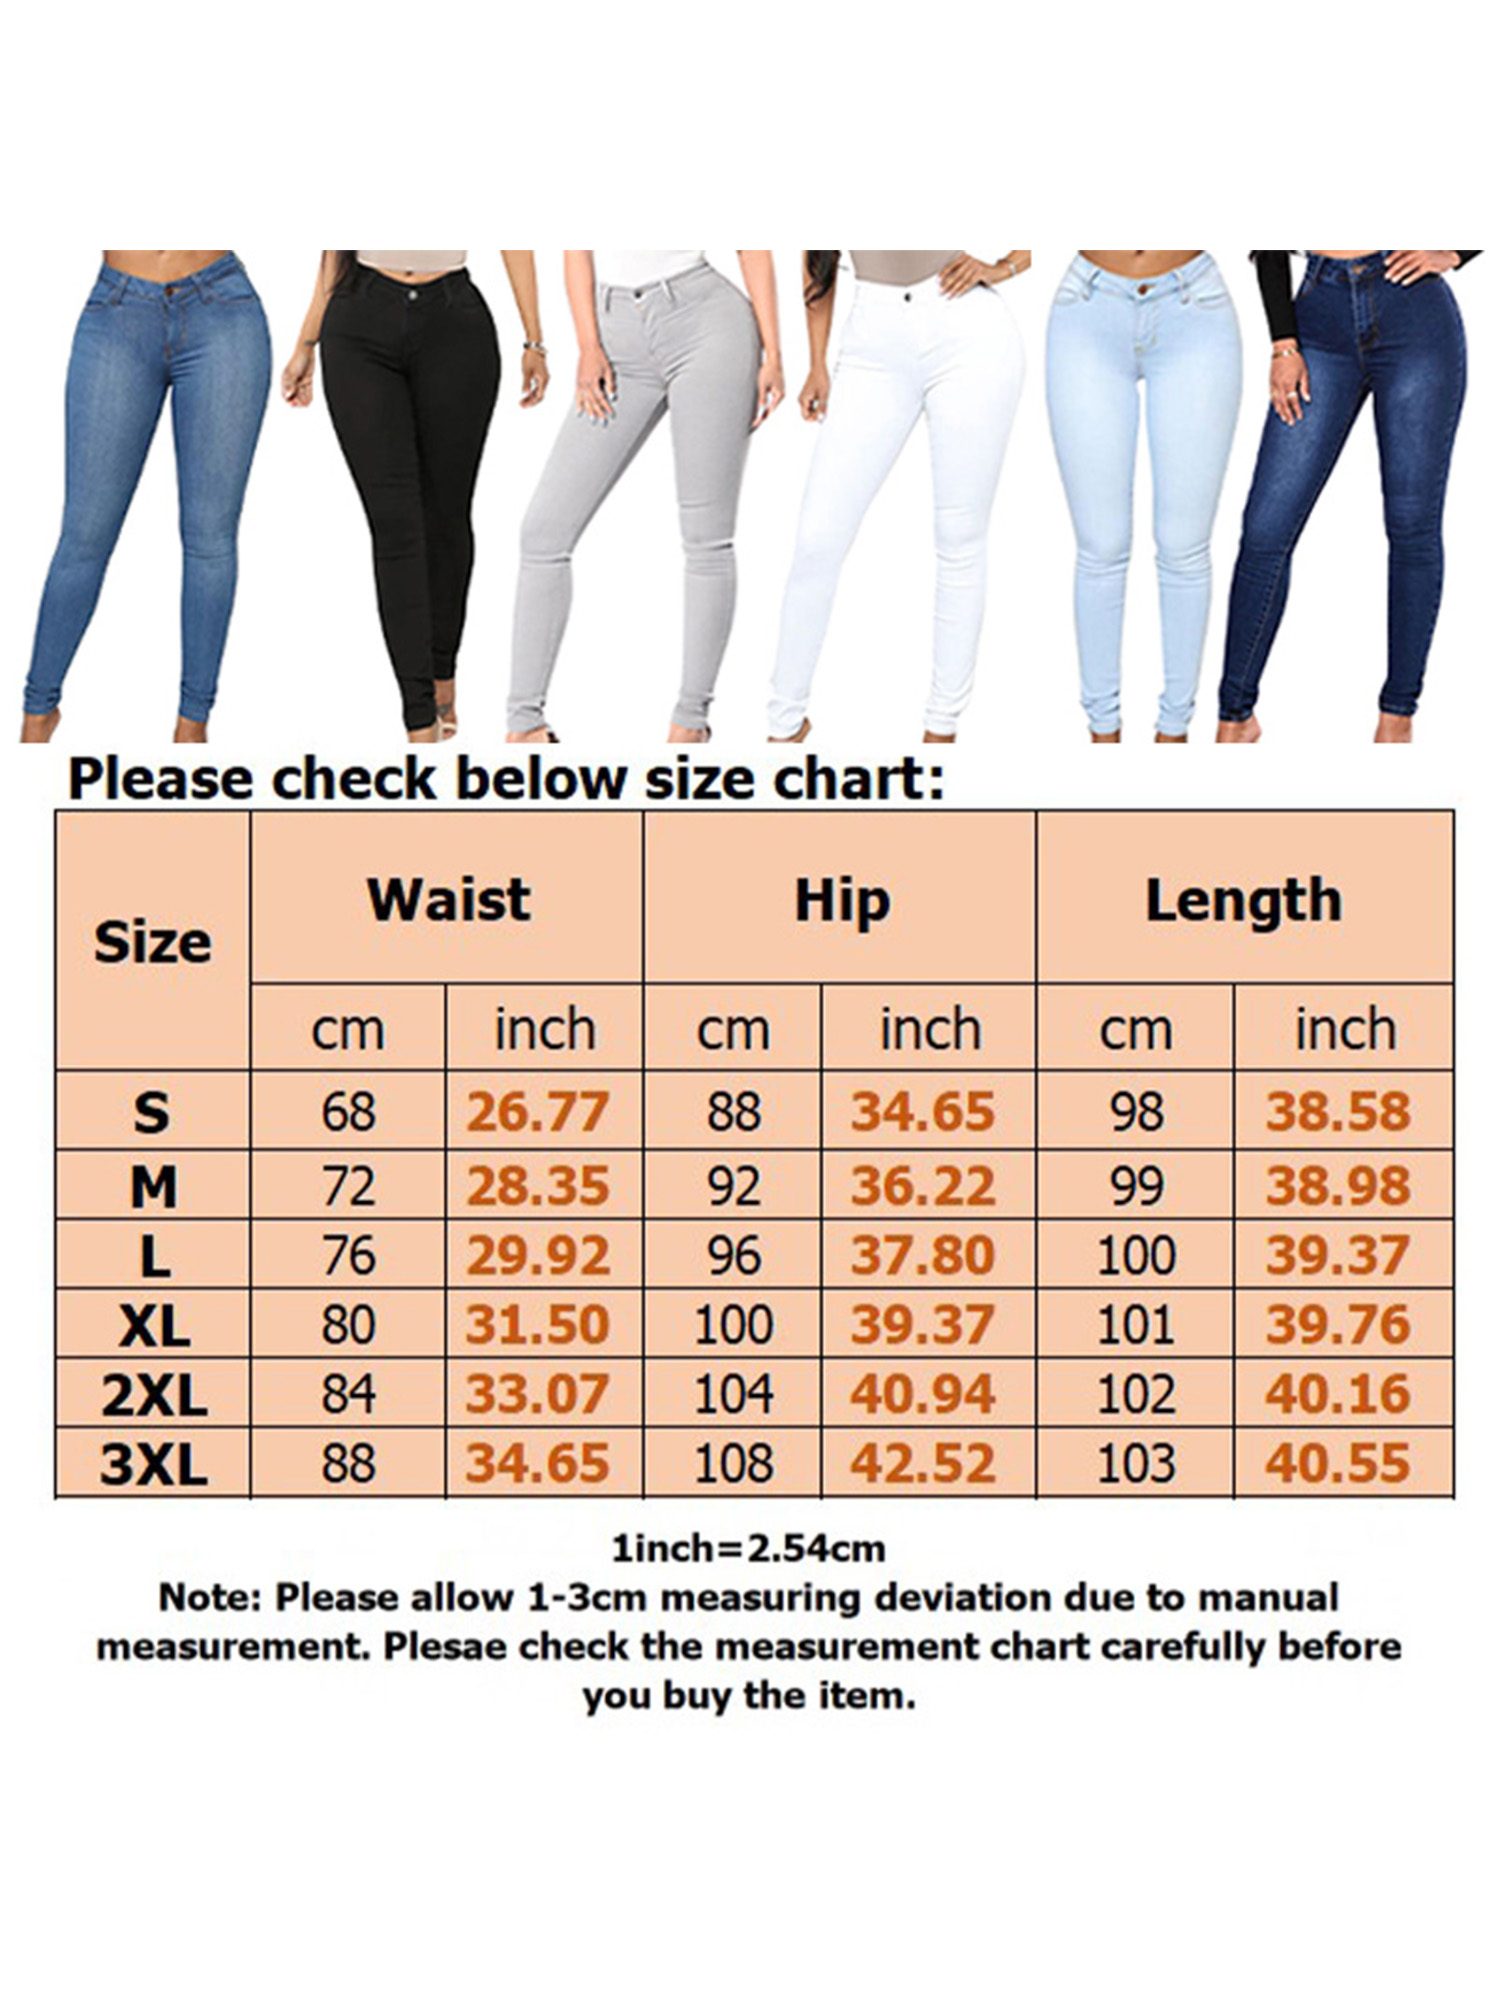 Women High Waist Jeans Pants Skinny Jeggings Pants Casual Bodycon Stretchy Pencil Pants Ladies Fashion Denim Pants Trousers - image 2 of 5